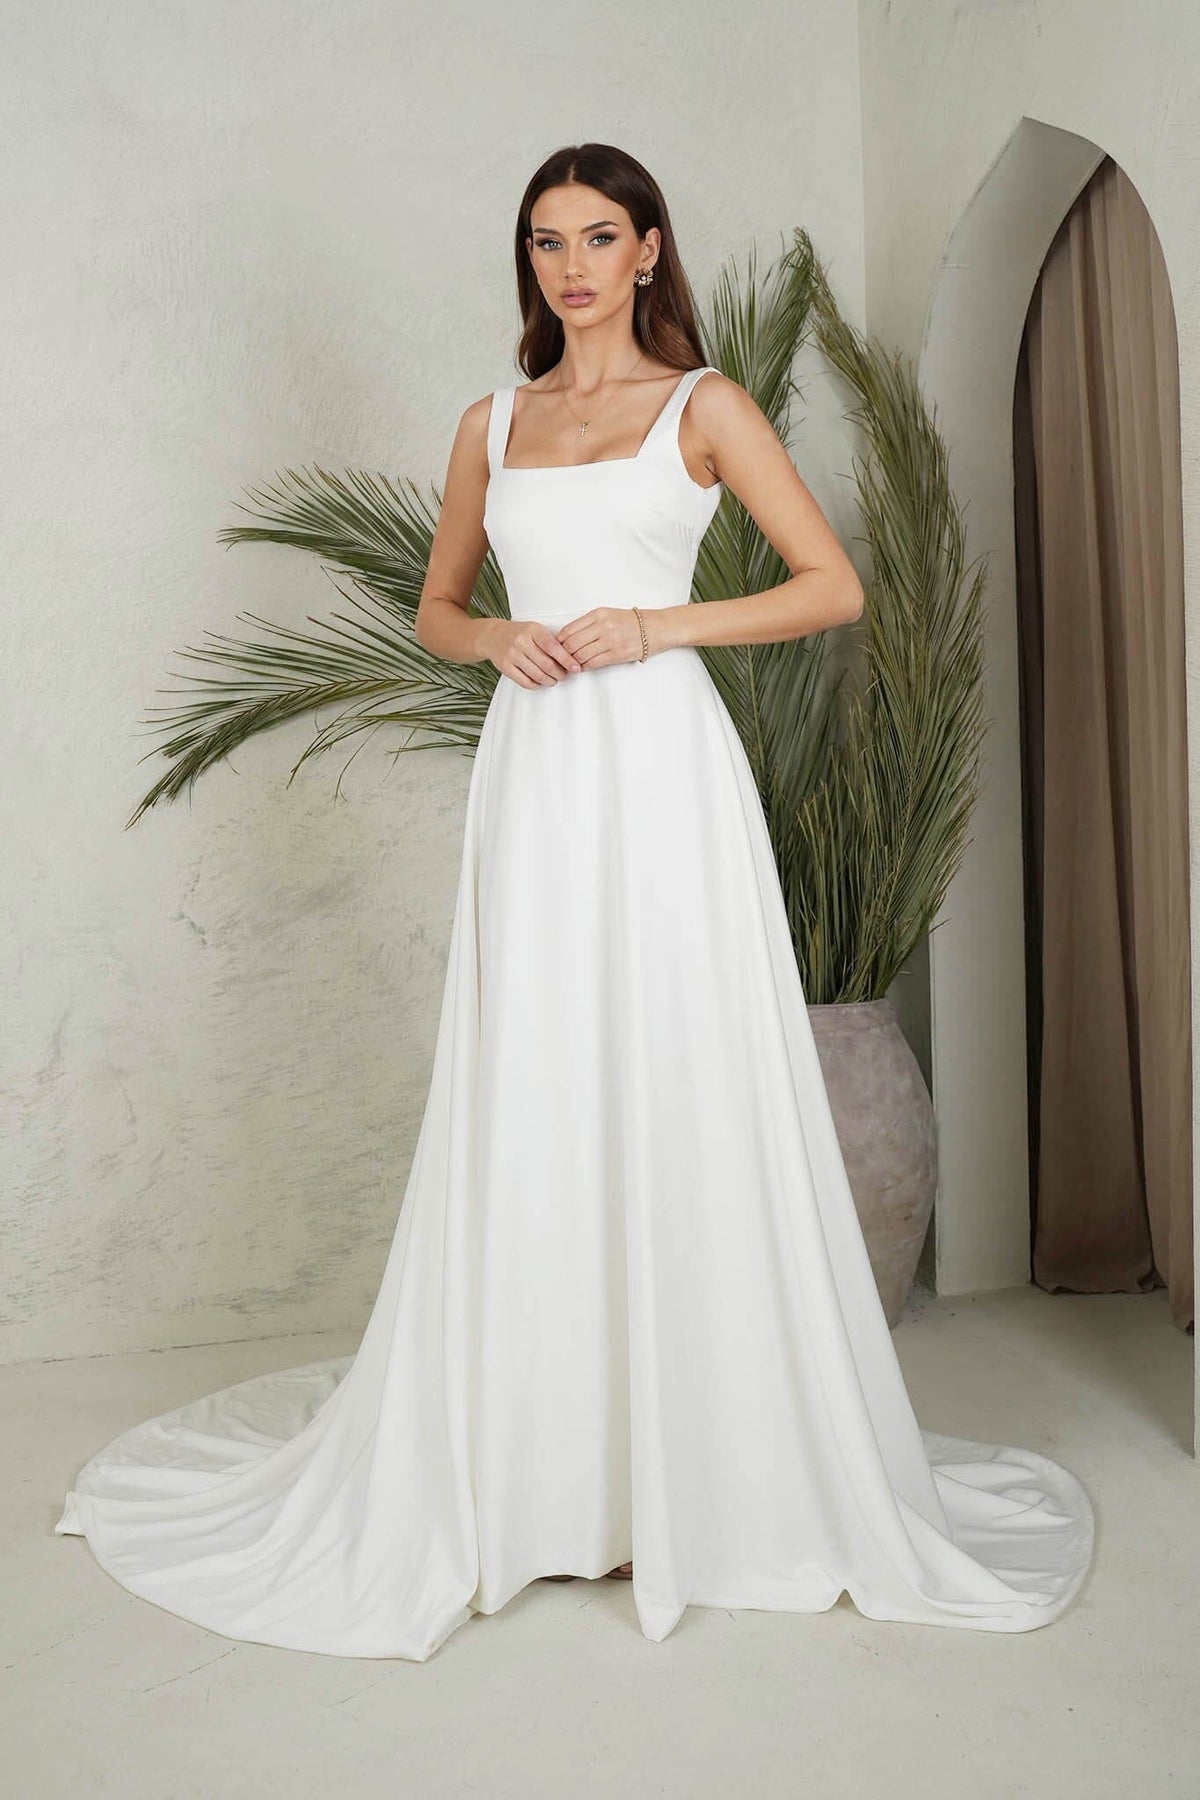 Satin Ivory White A-line Ball Gown with Square Neckline, Shoulder Straps and Detachable Belt